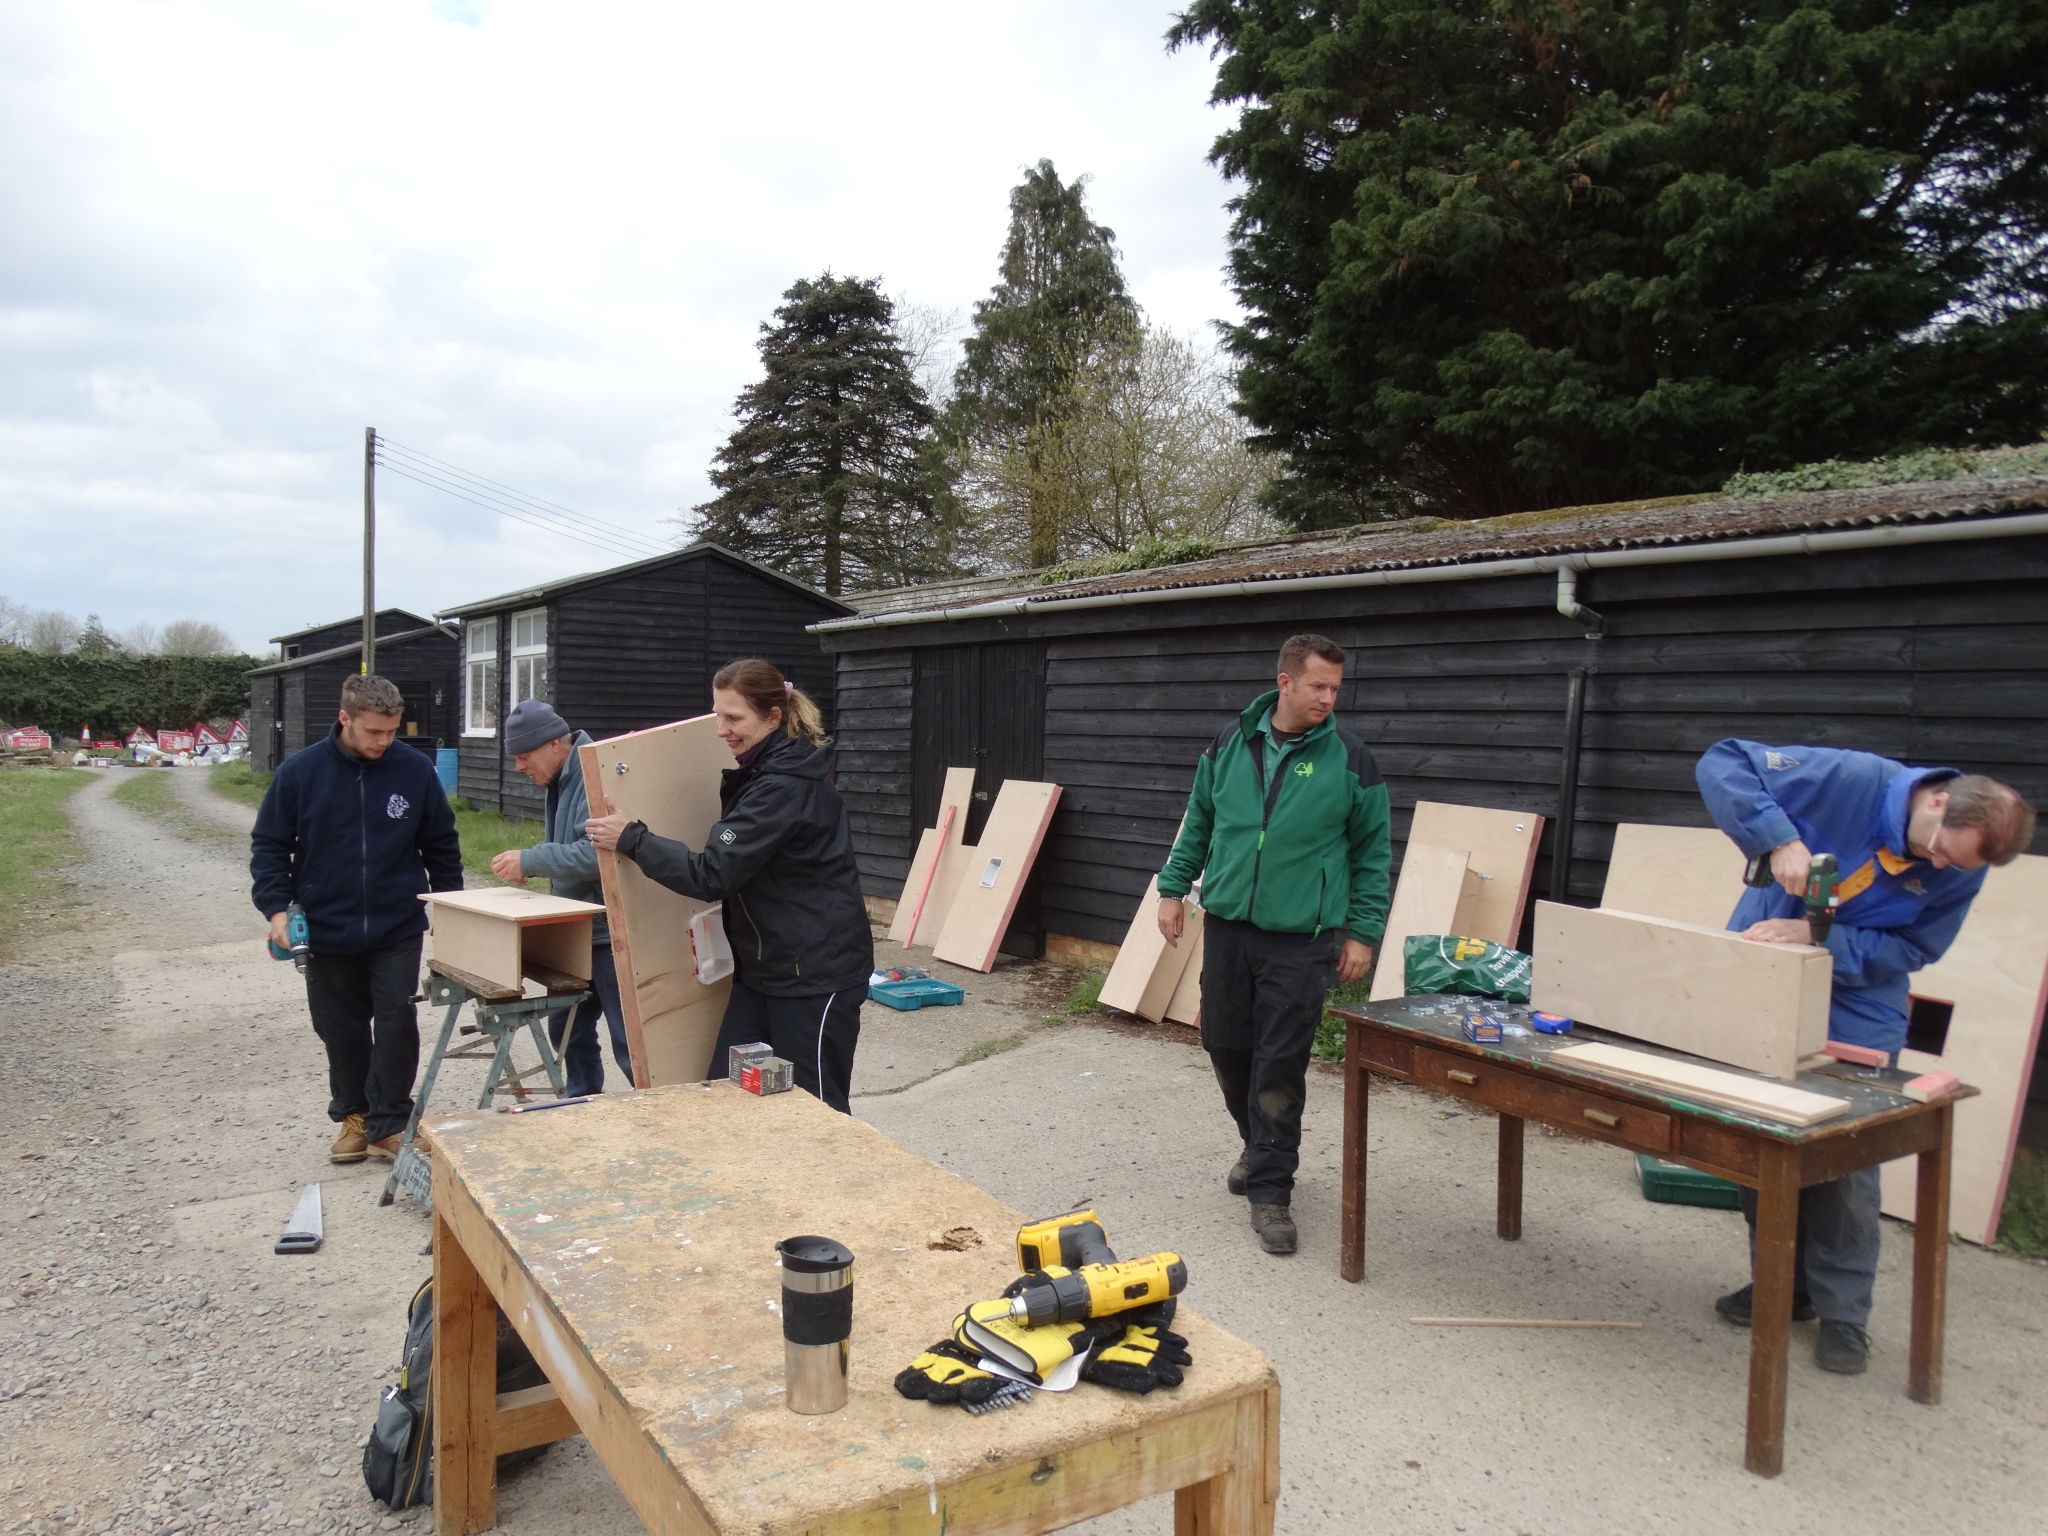 A photo from the FoTF Conservation Event - April 2019 - Mink Raft Construction at Santon Downham Workshops : Volunteers works outside on benches assembling components for mink rafts